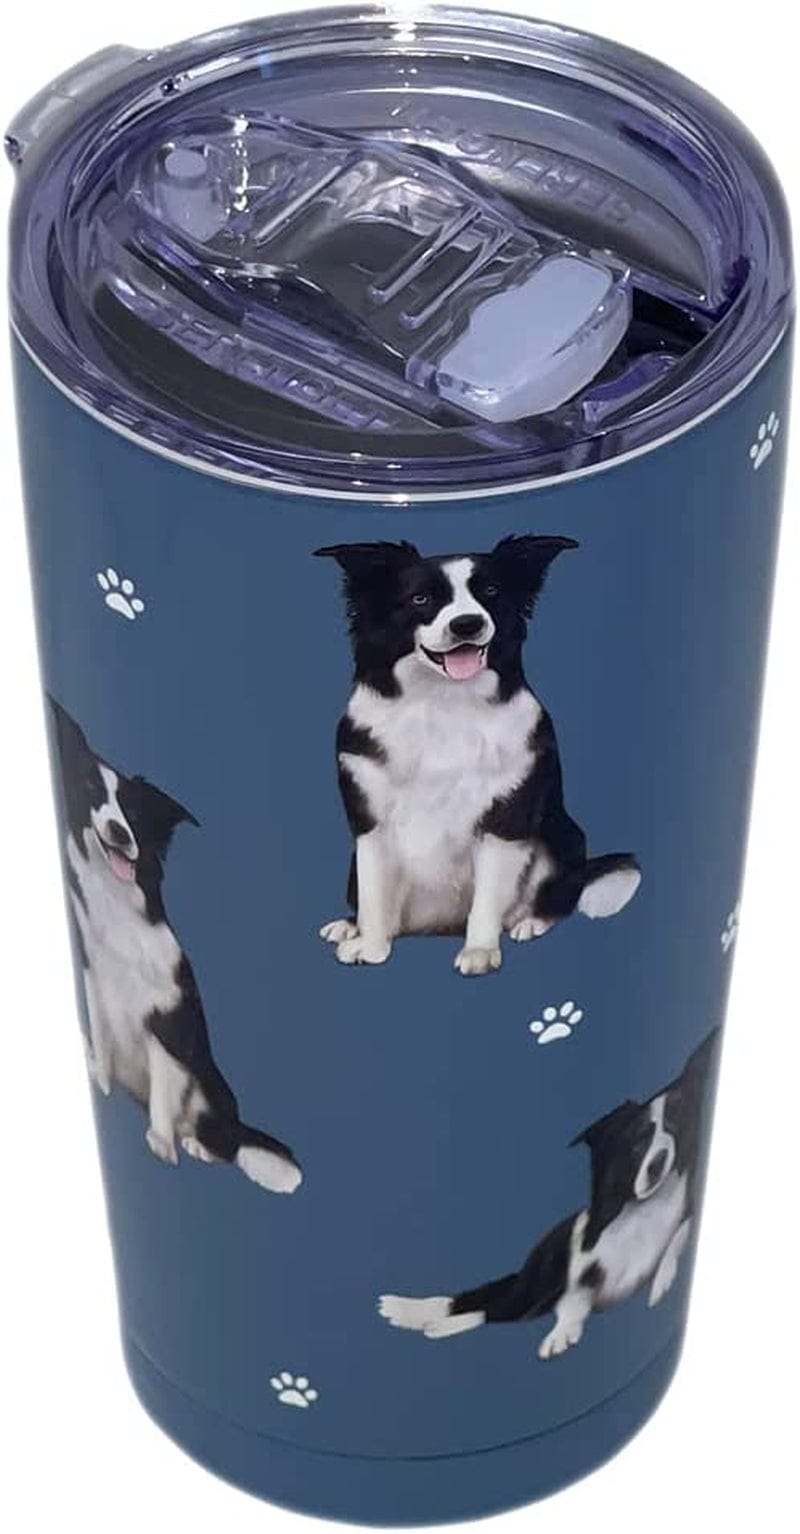 Australian Shepherd SERENGETI 16 Oz. Stainless Steel, Vacuum Insulated Tumbler with Spill Proof Lid - 3D Print - Insulated Travel Mug for Hot or Cold Drinks (Australian Shepherd Tumbler) Home & Garden > Kitchen & Dining > Tableware > Drinkware SERENGETI Border Collie Tumbler  